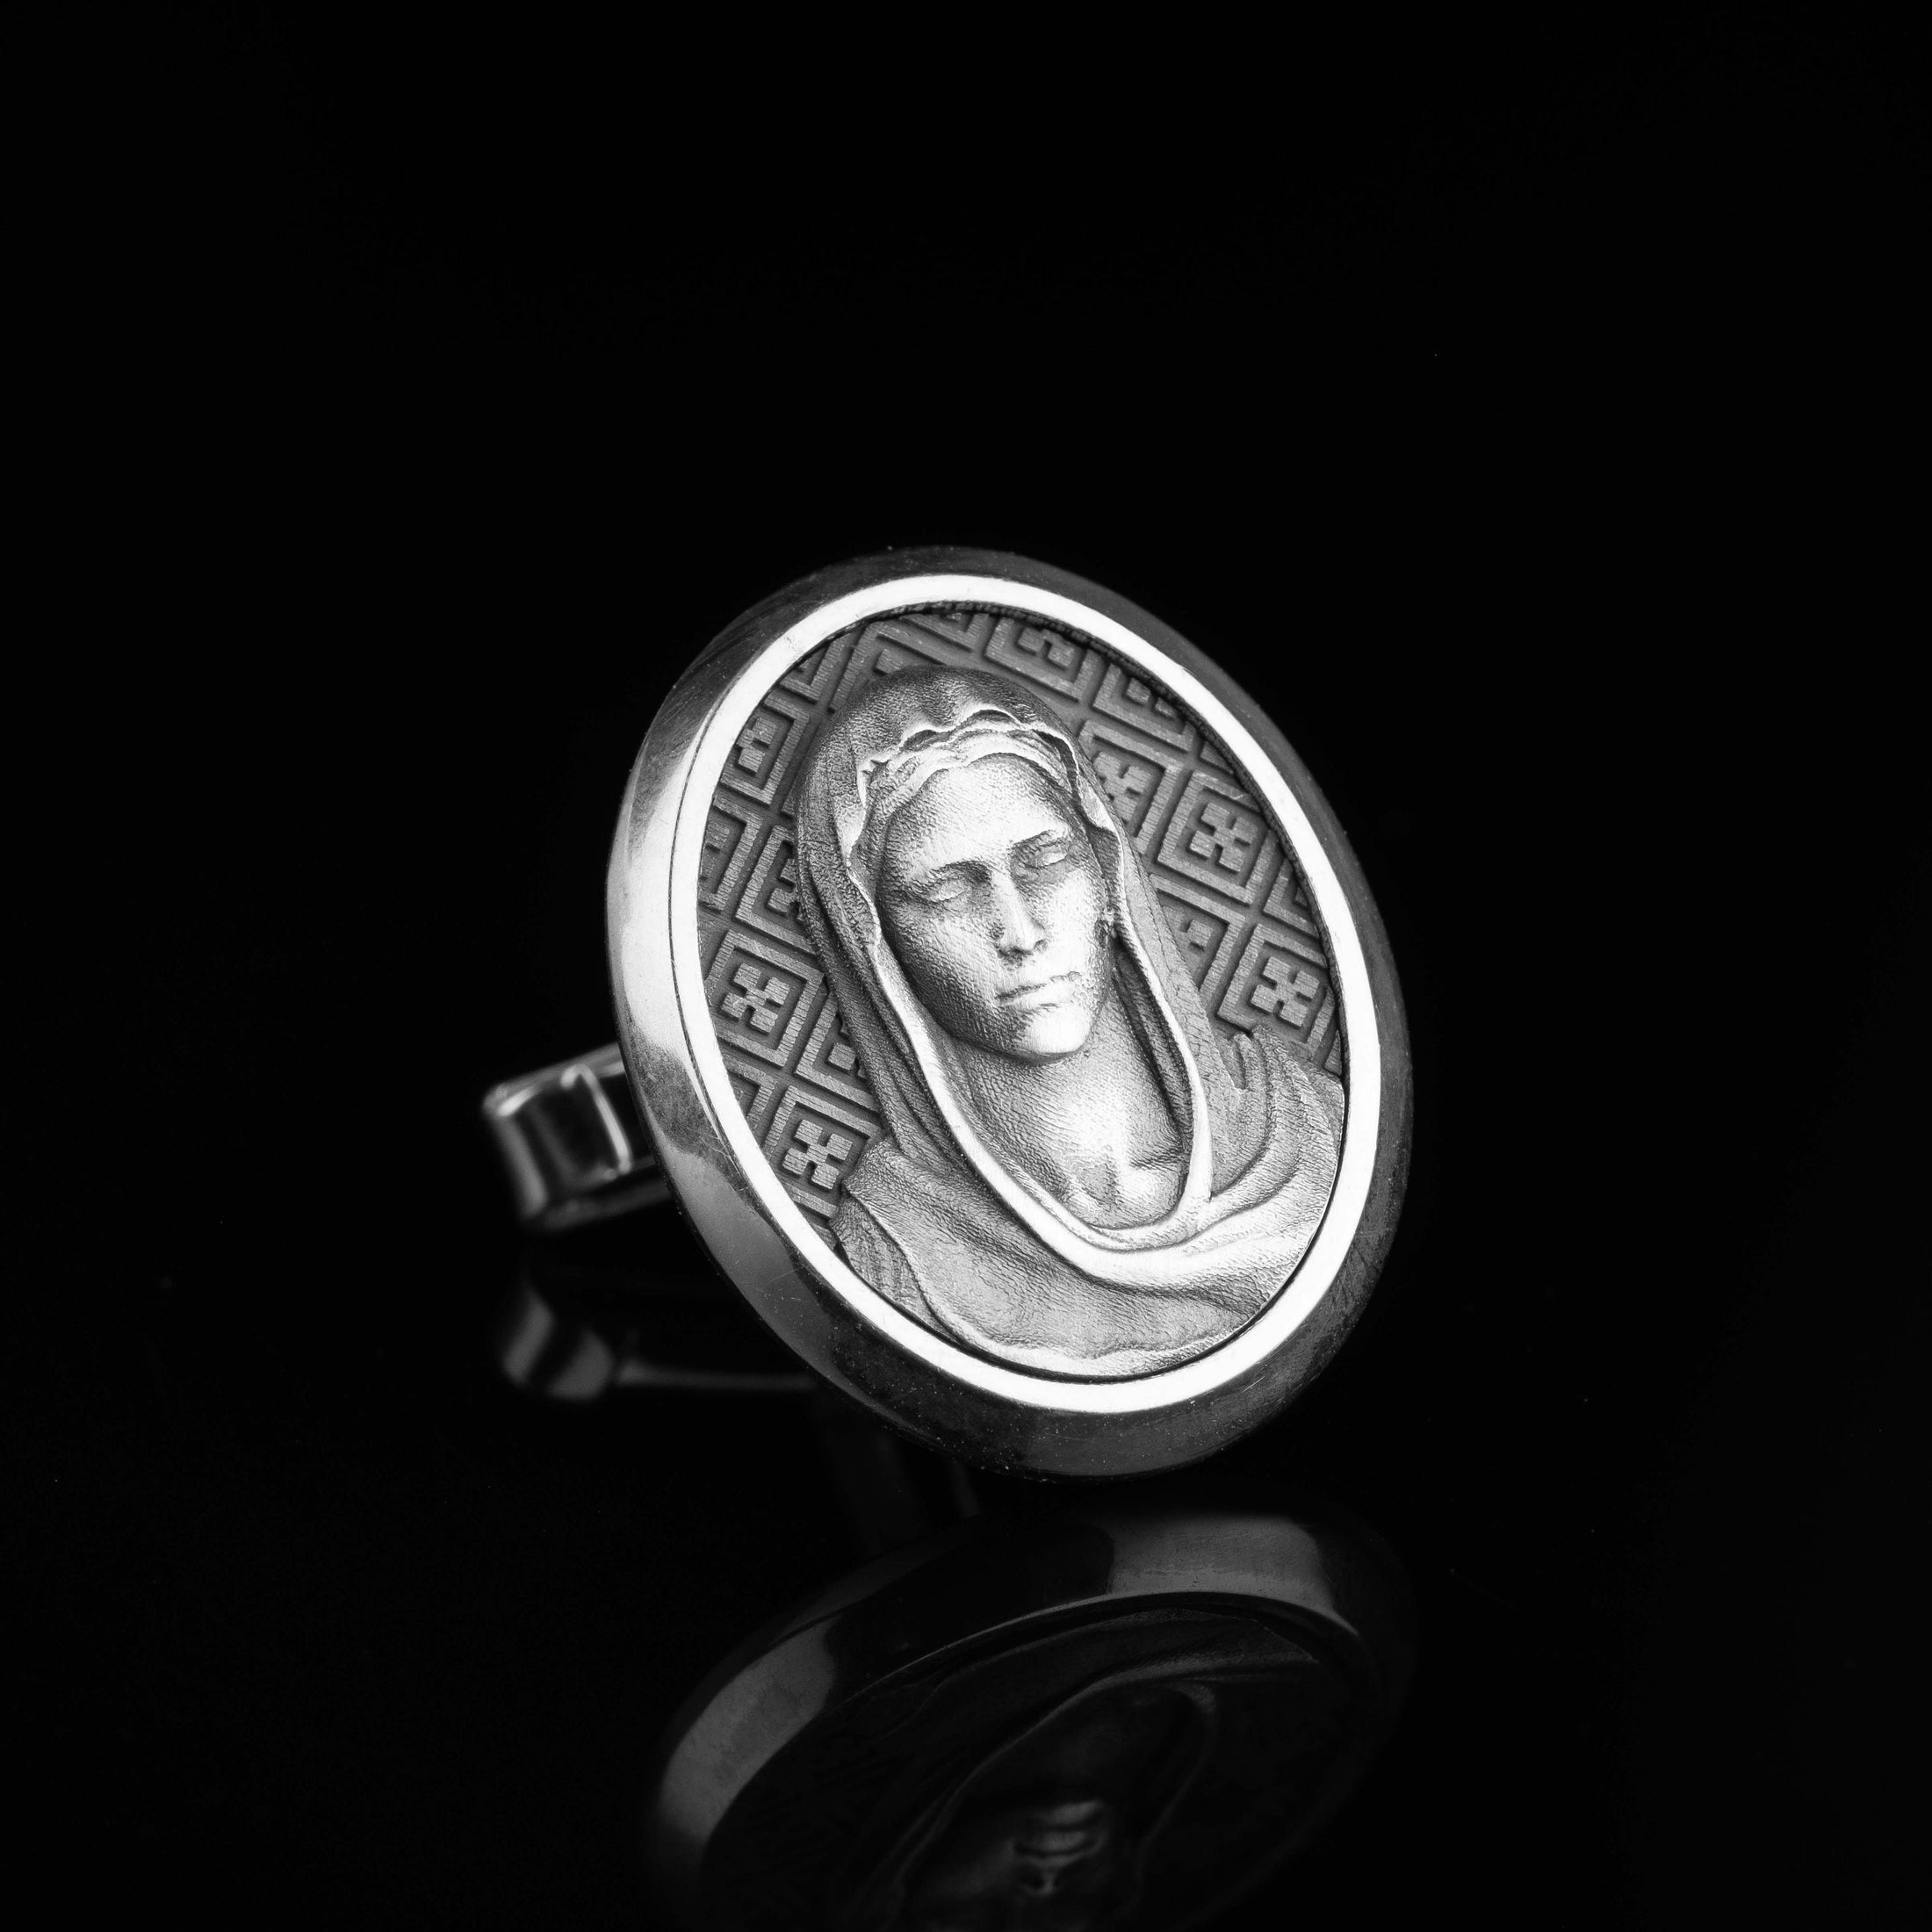 Miraculous Medal Cuff Links, Blessed Virgin Mary, Mother Of God, Memorial Gift, Engraved Cufflinks, Catholic Cufflinks, Religious Gift Polished Frame